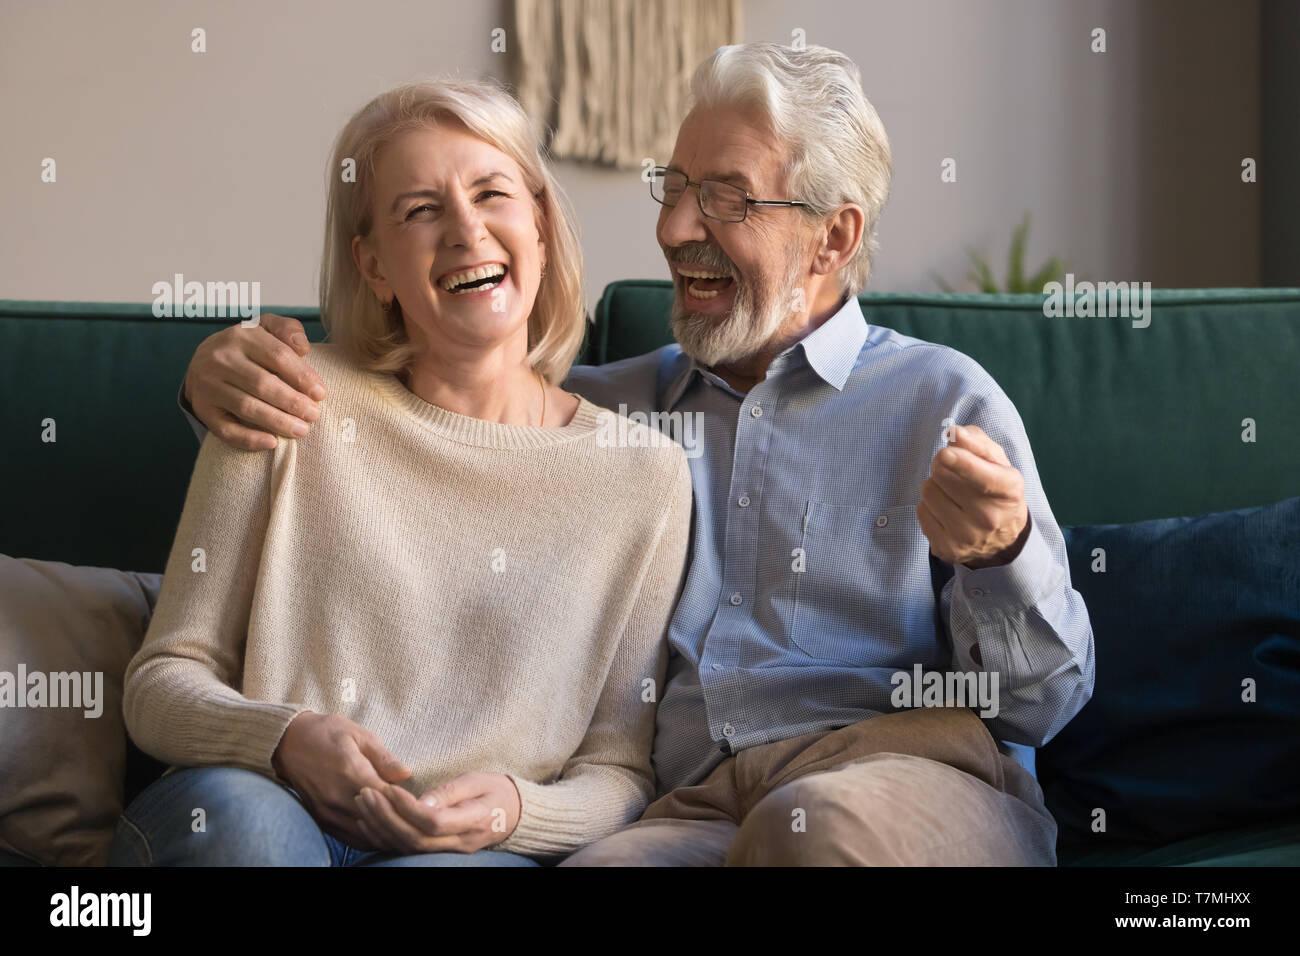 Portrait of middle aged laughing man and woman at home Stock Photo